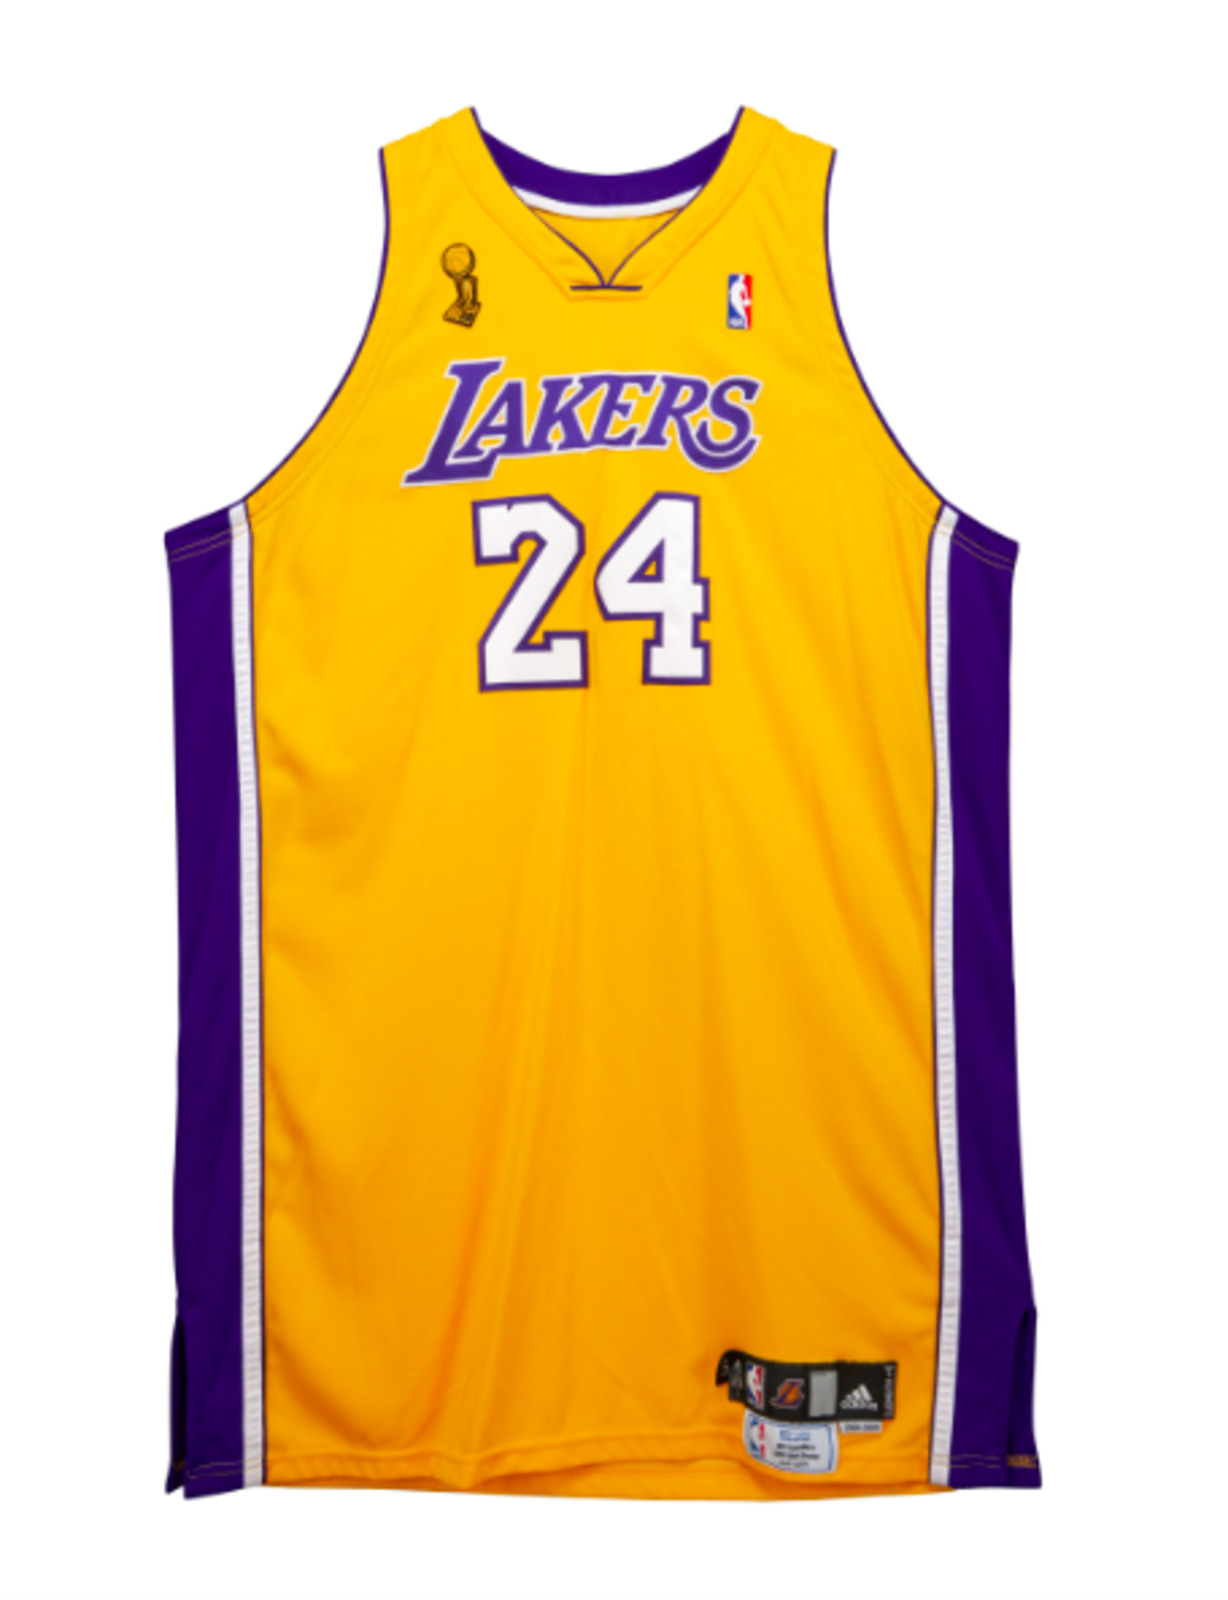 Kobe Bryant game-worn 2009 NBA Finals jersey from Game 1